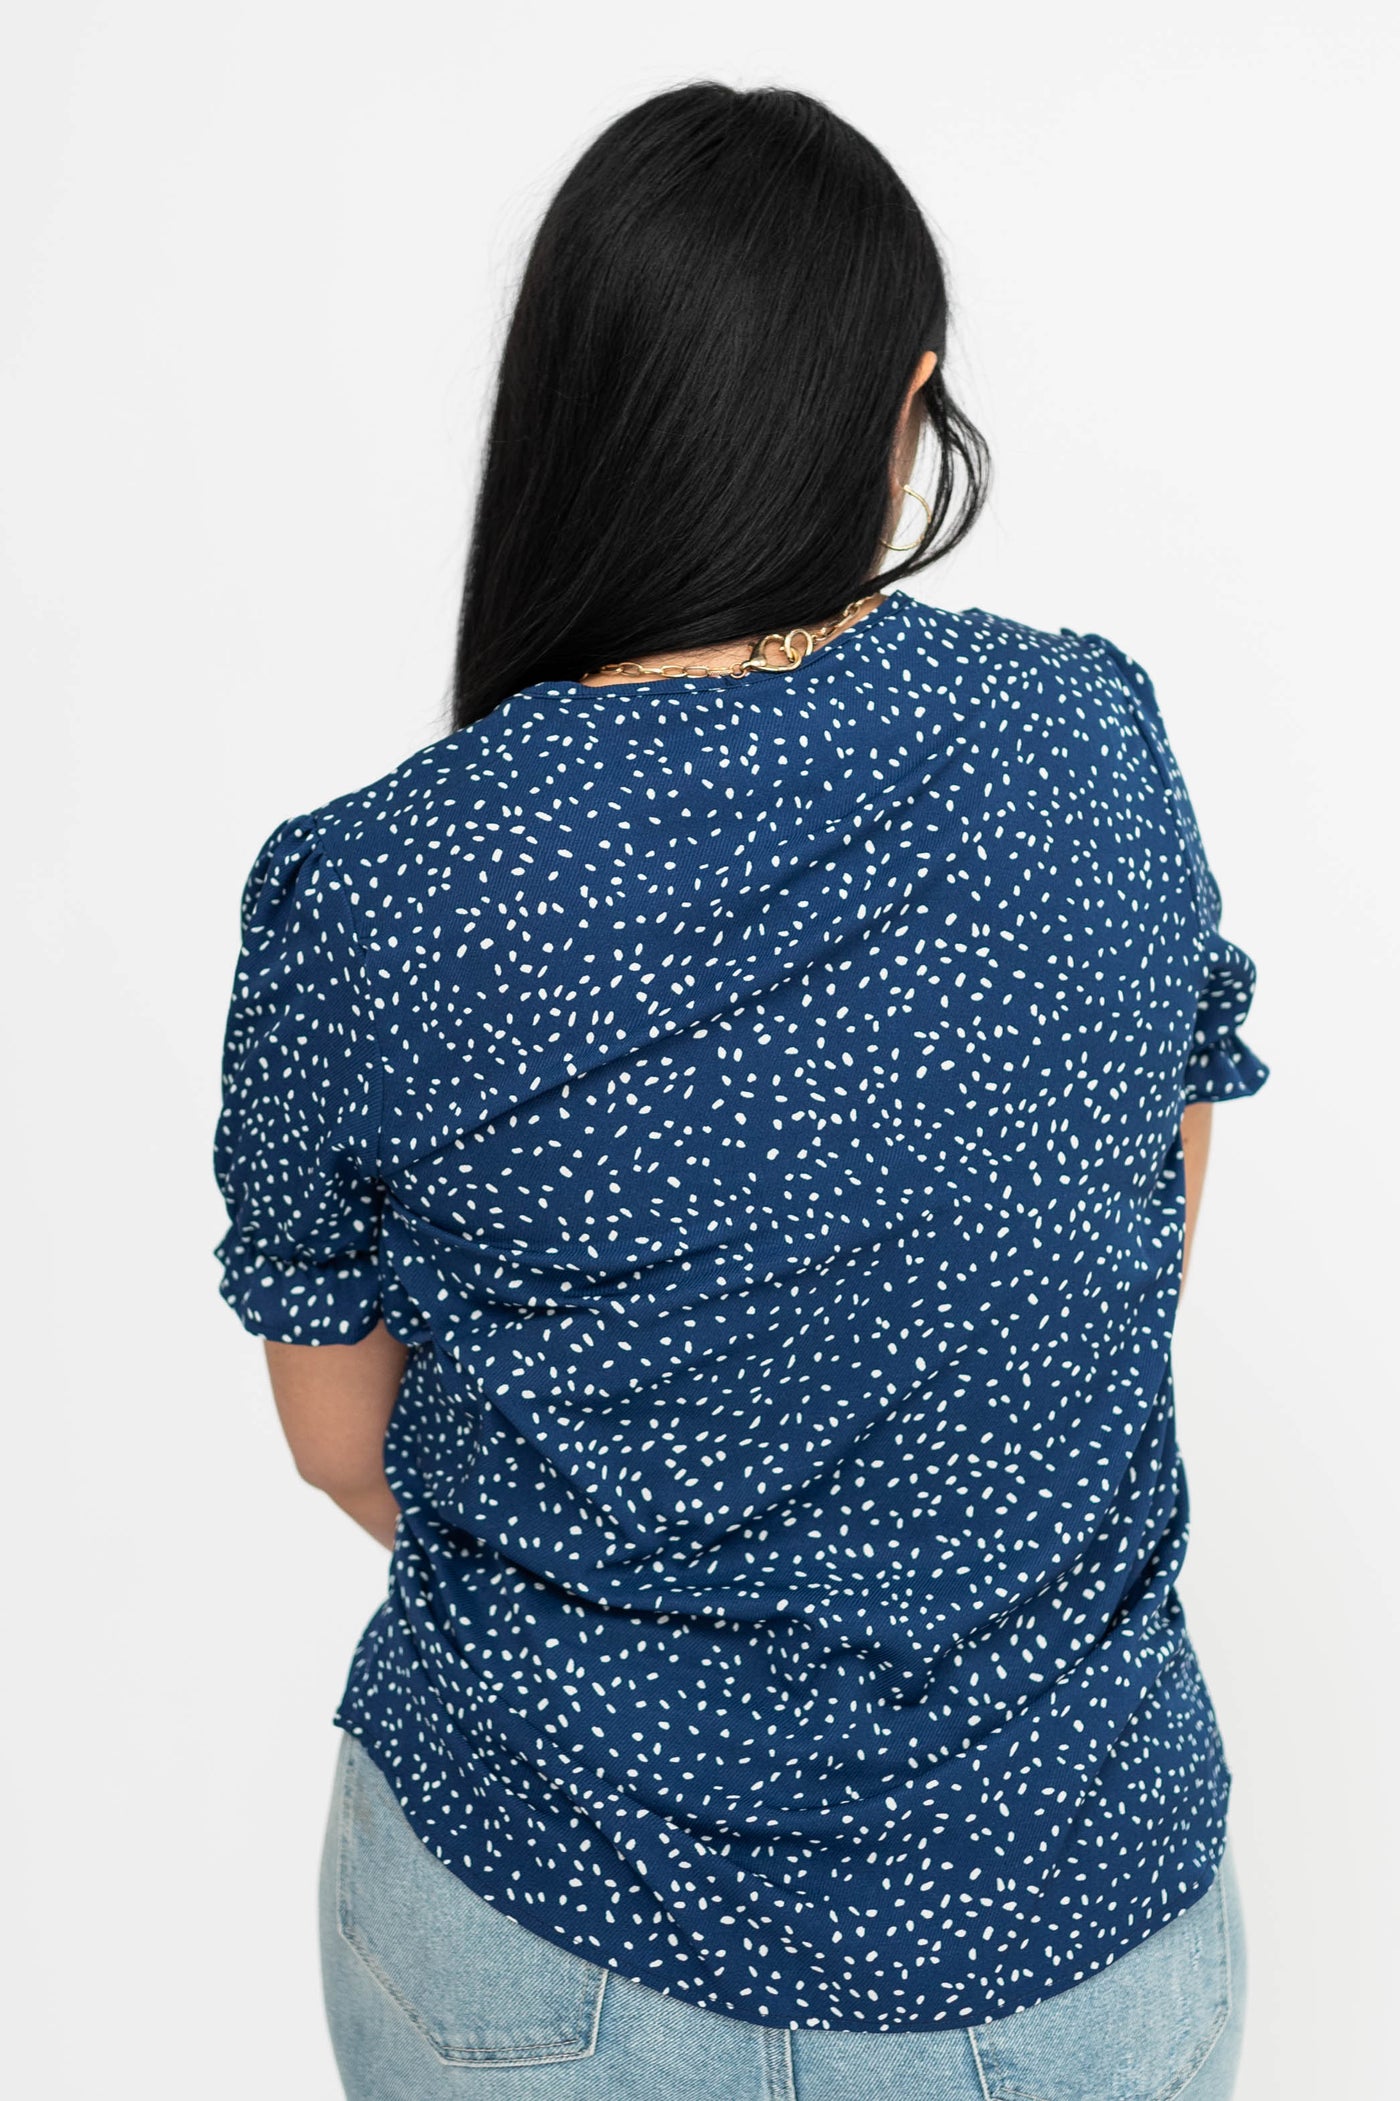 Back view of a large navy top